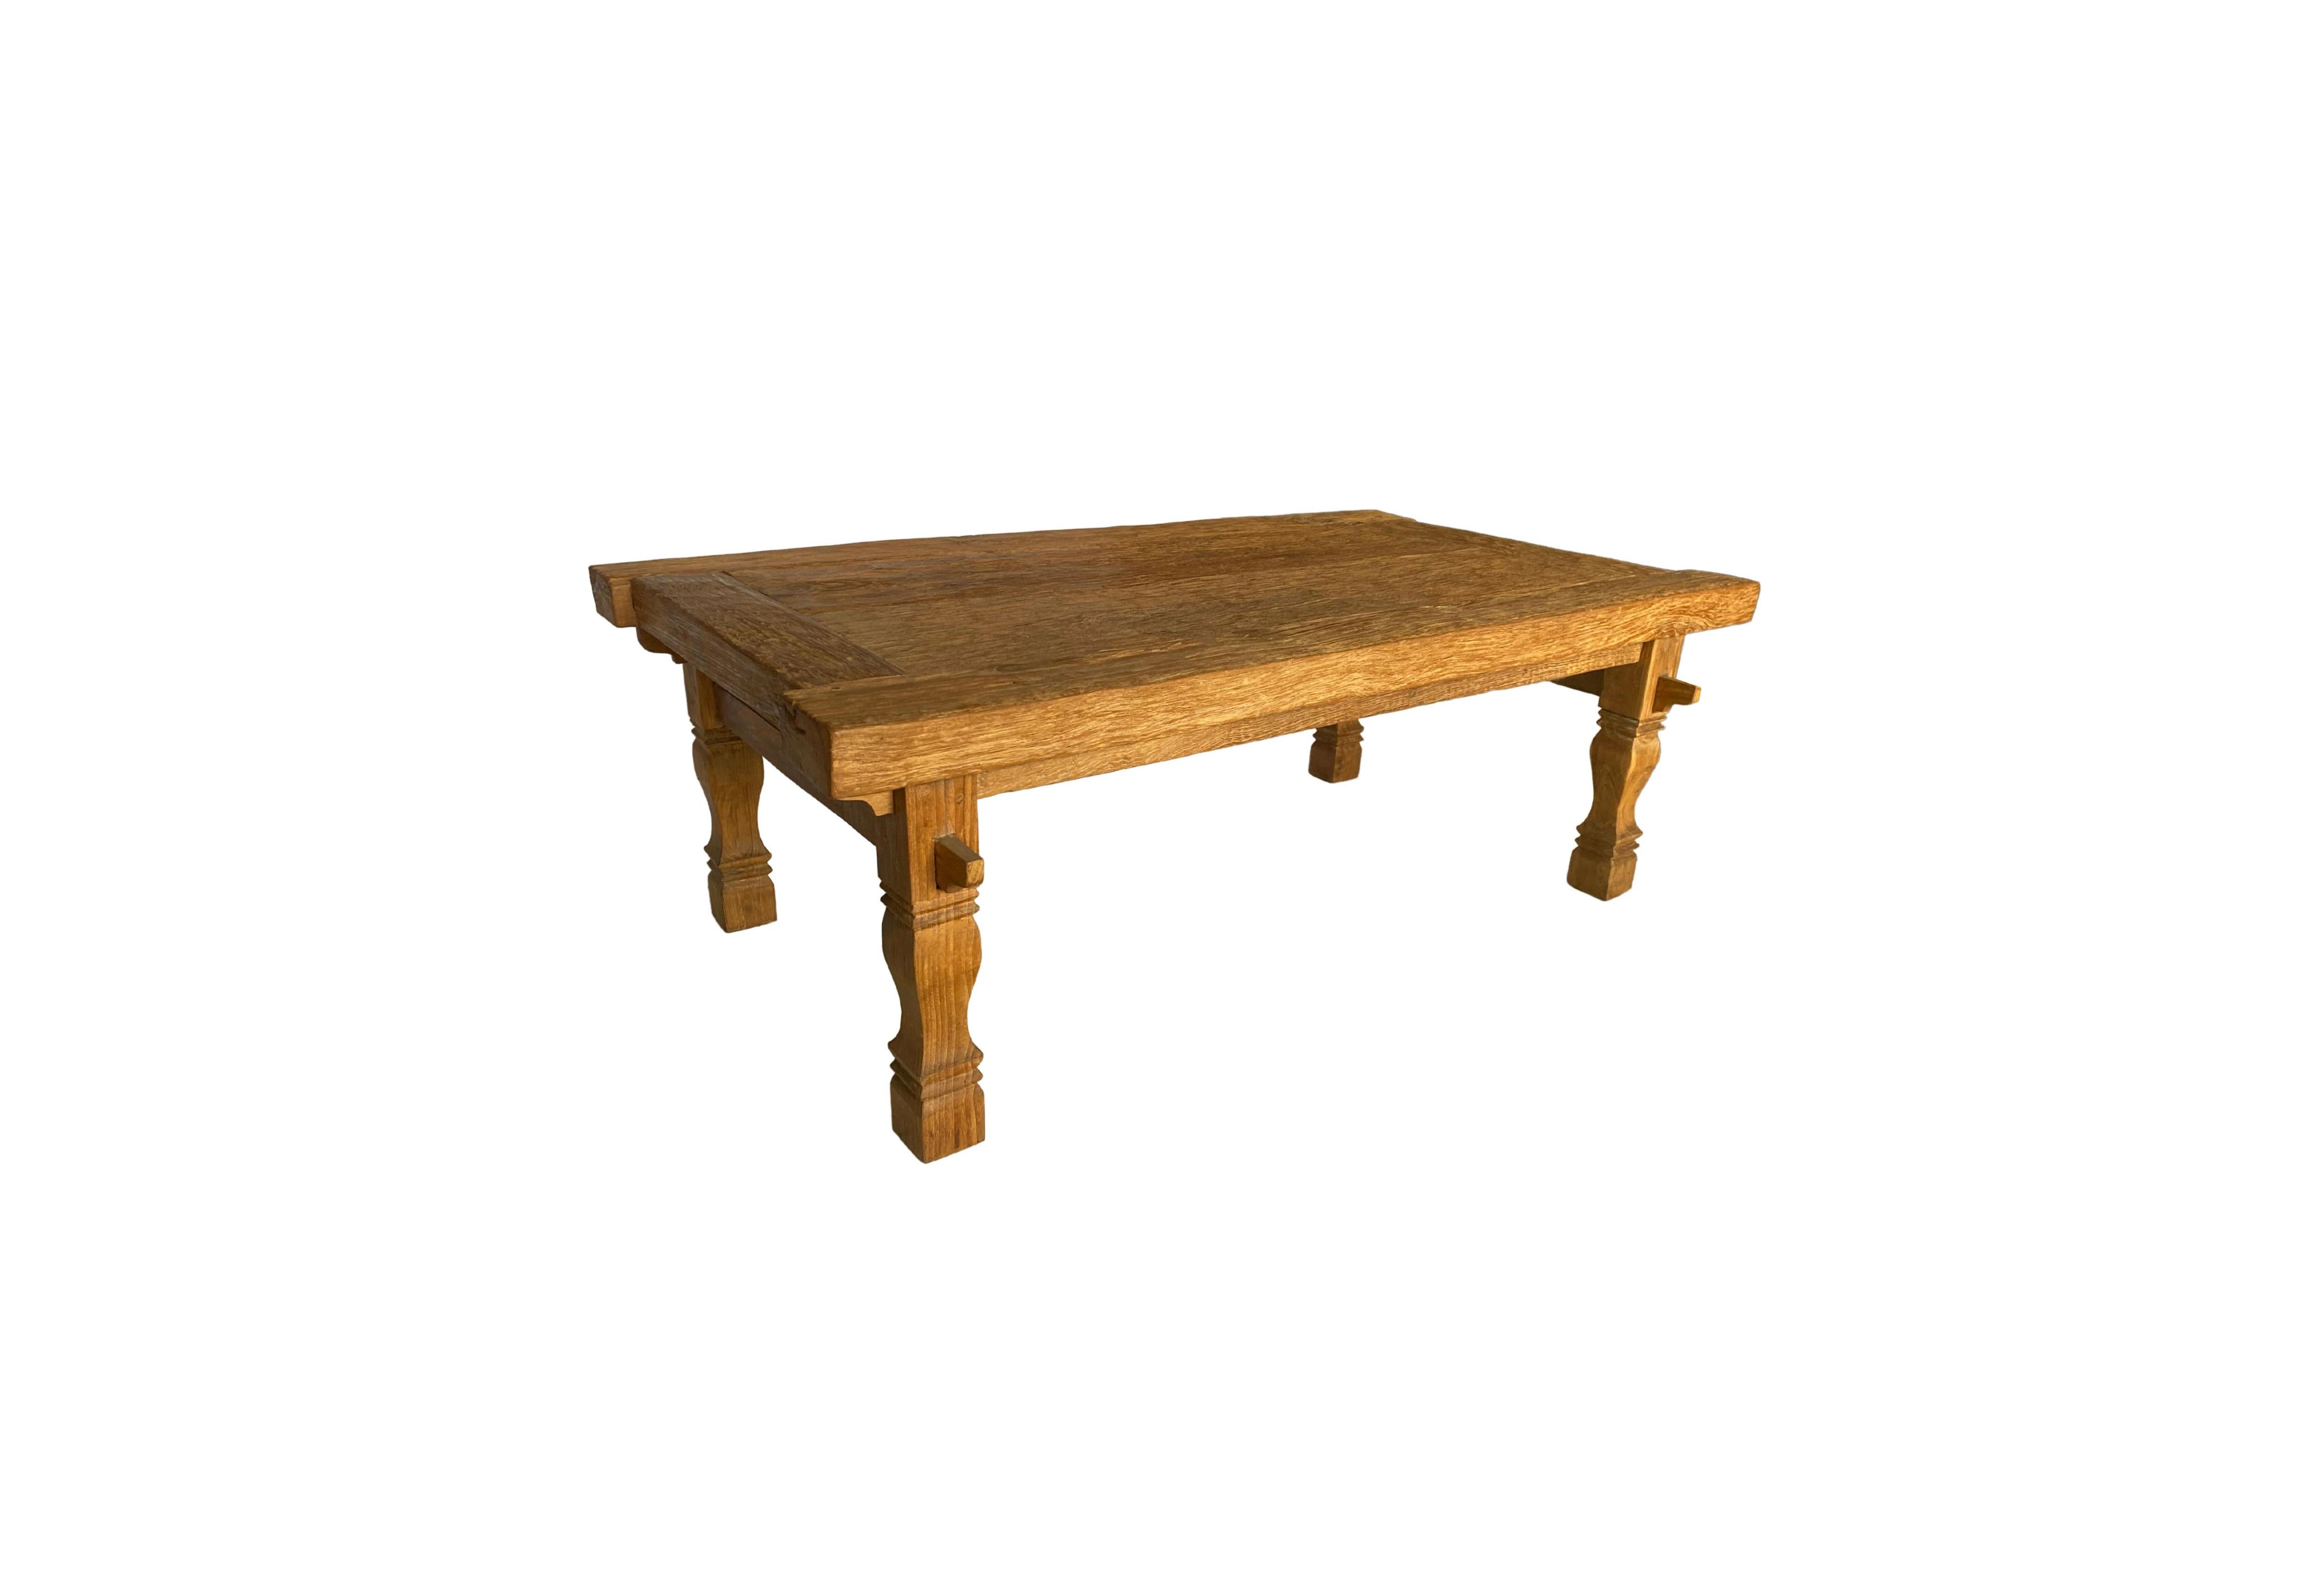 A skilfully crafted teak wood table. This table was crafted by local artisans using a wood joinery technique without the use of nails. The table is wonderfully proportioned with legs that feature carved detailing. The teak wood patterning and